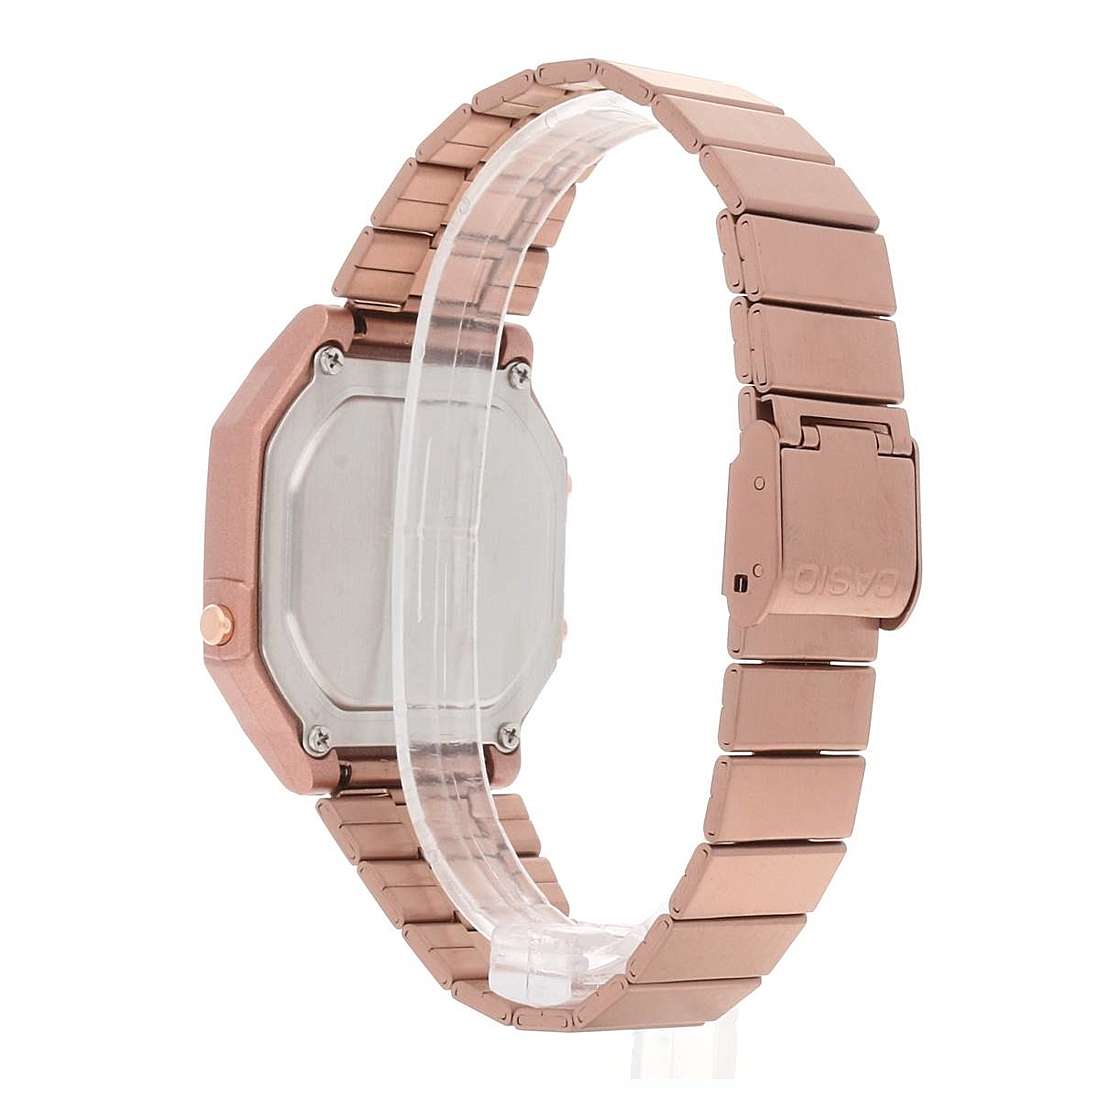 Offers watches woman Casio B650WC-5AEF